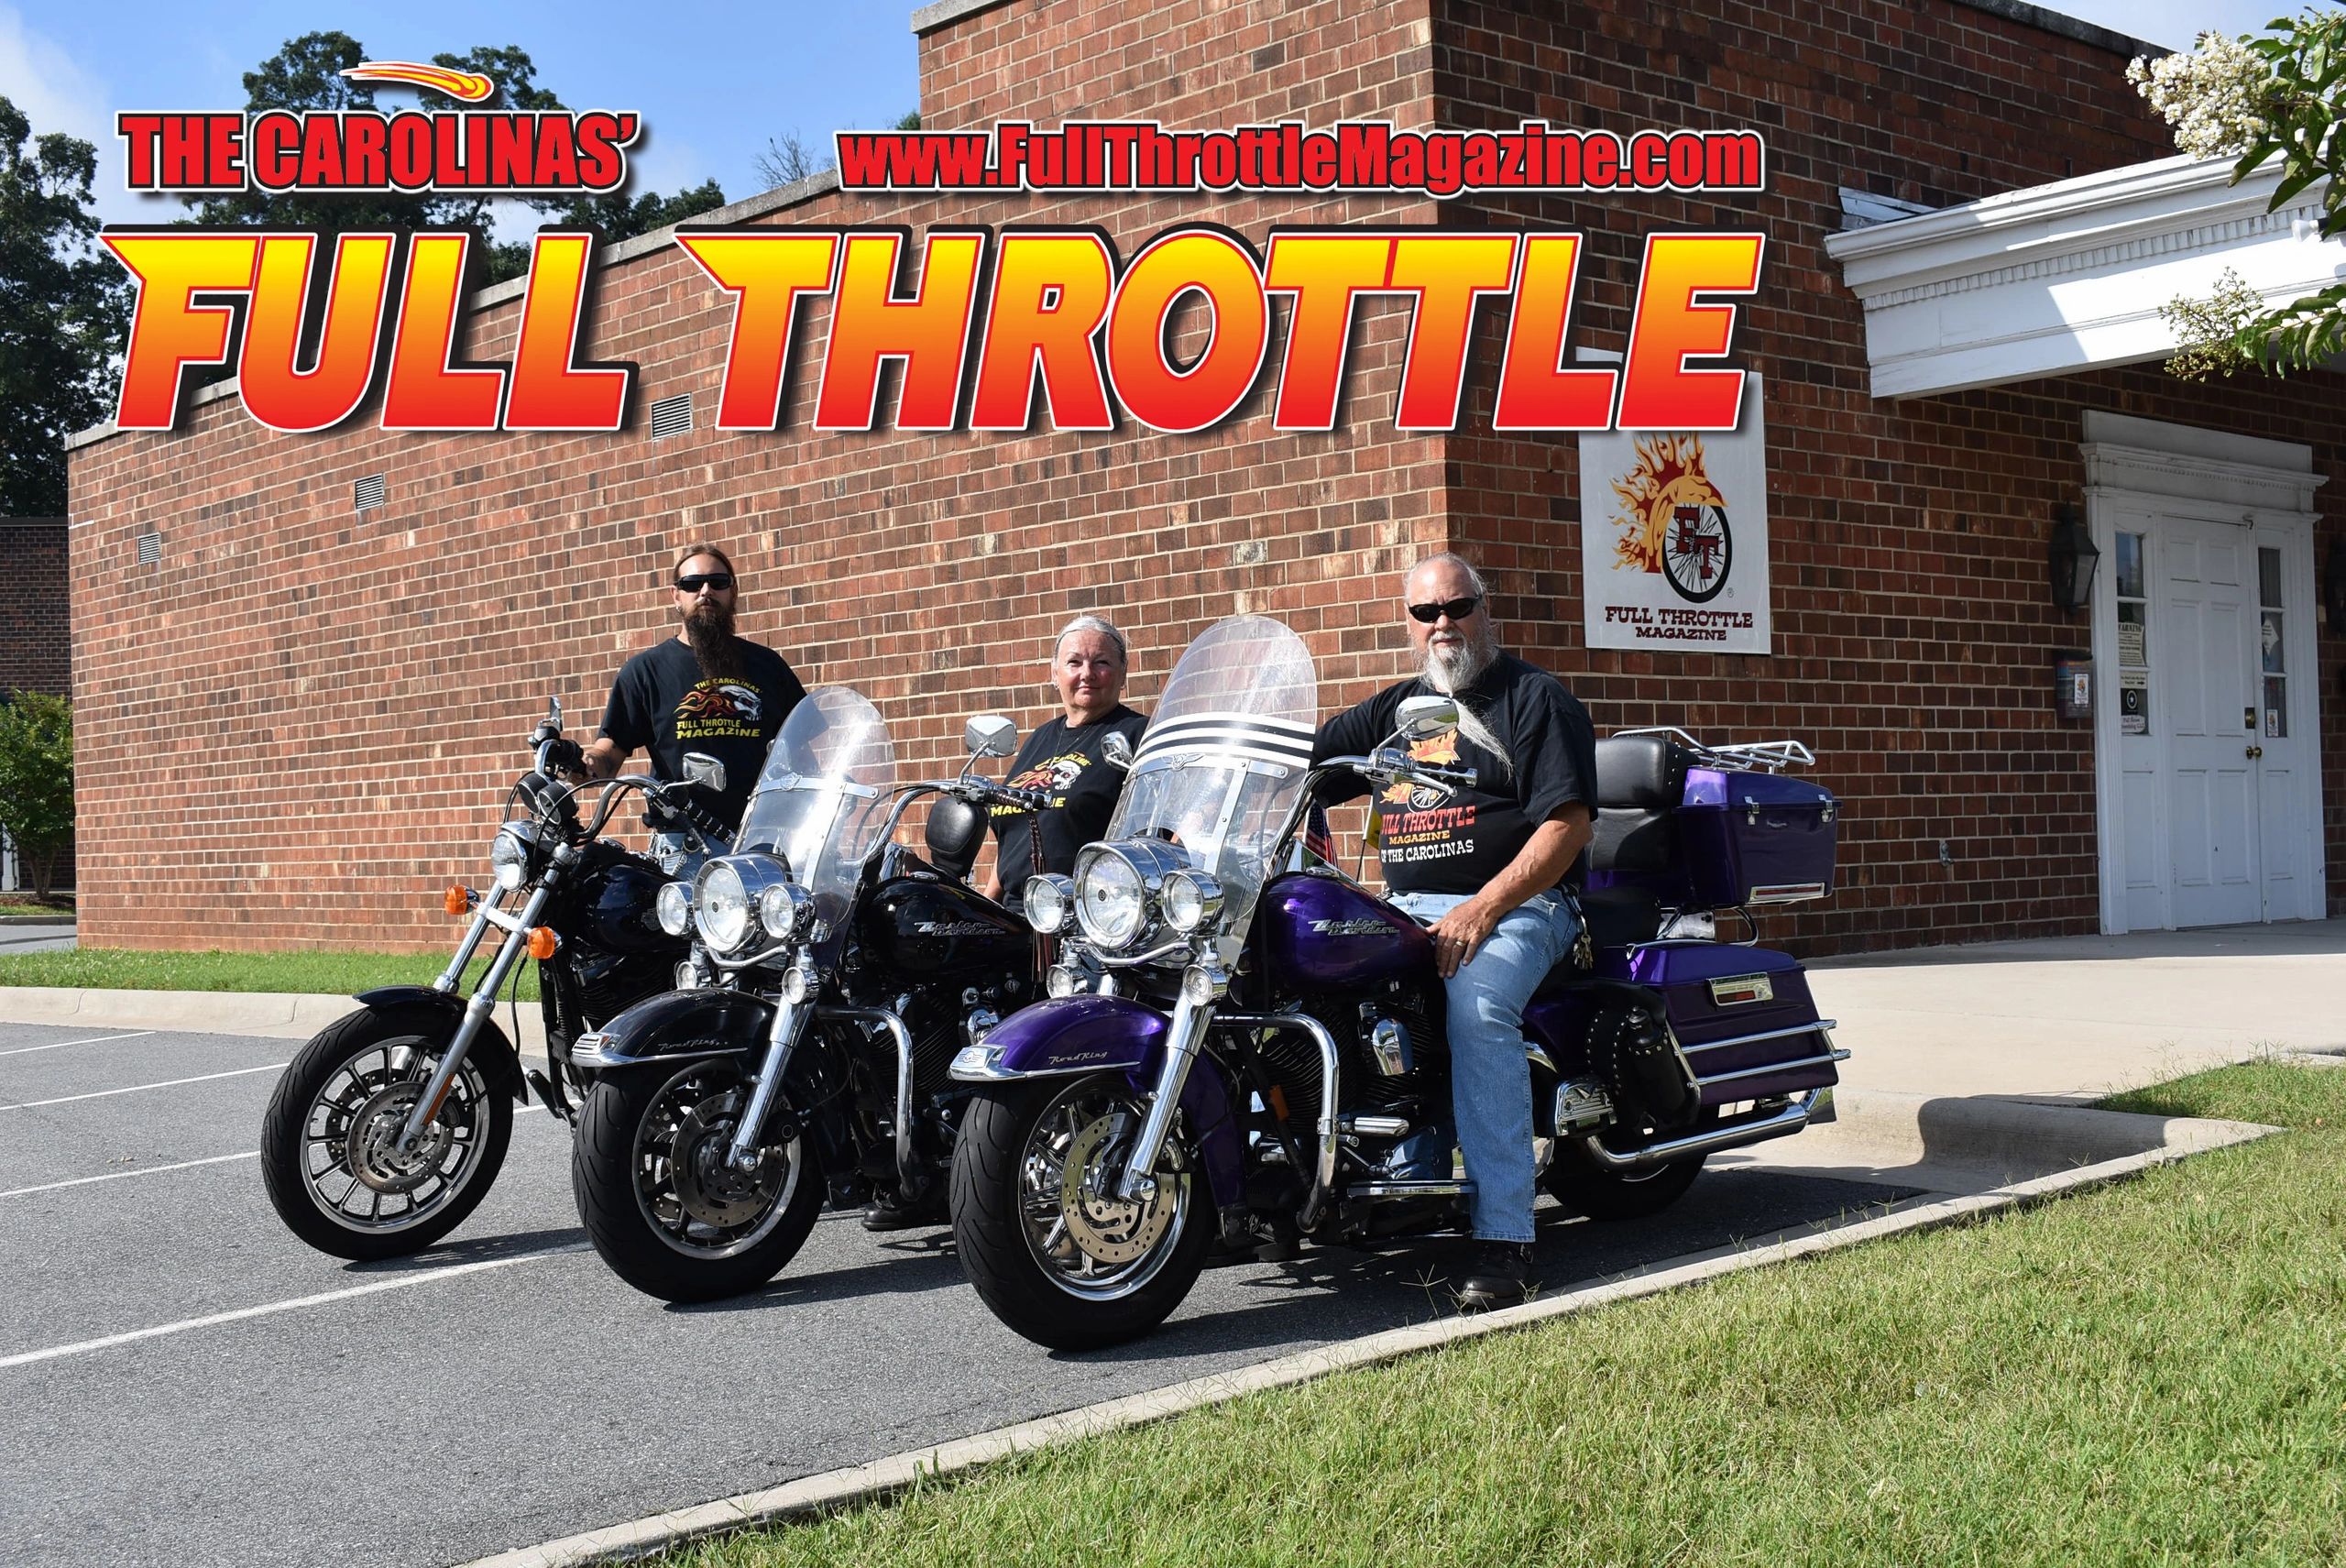 Motorcycle Rides Near Fayetteville Nc Reviewmotors.co